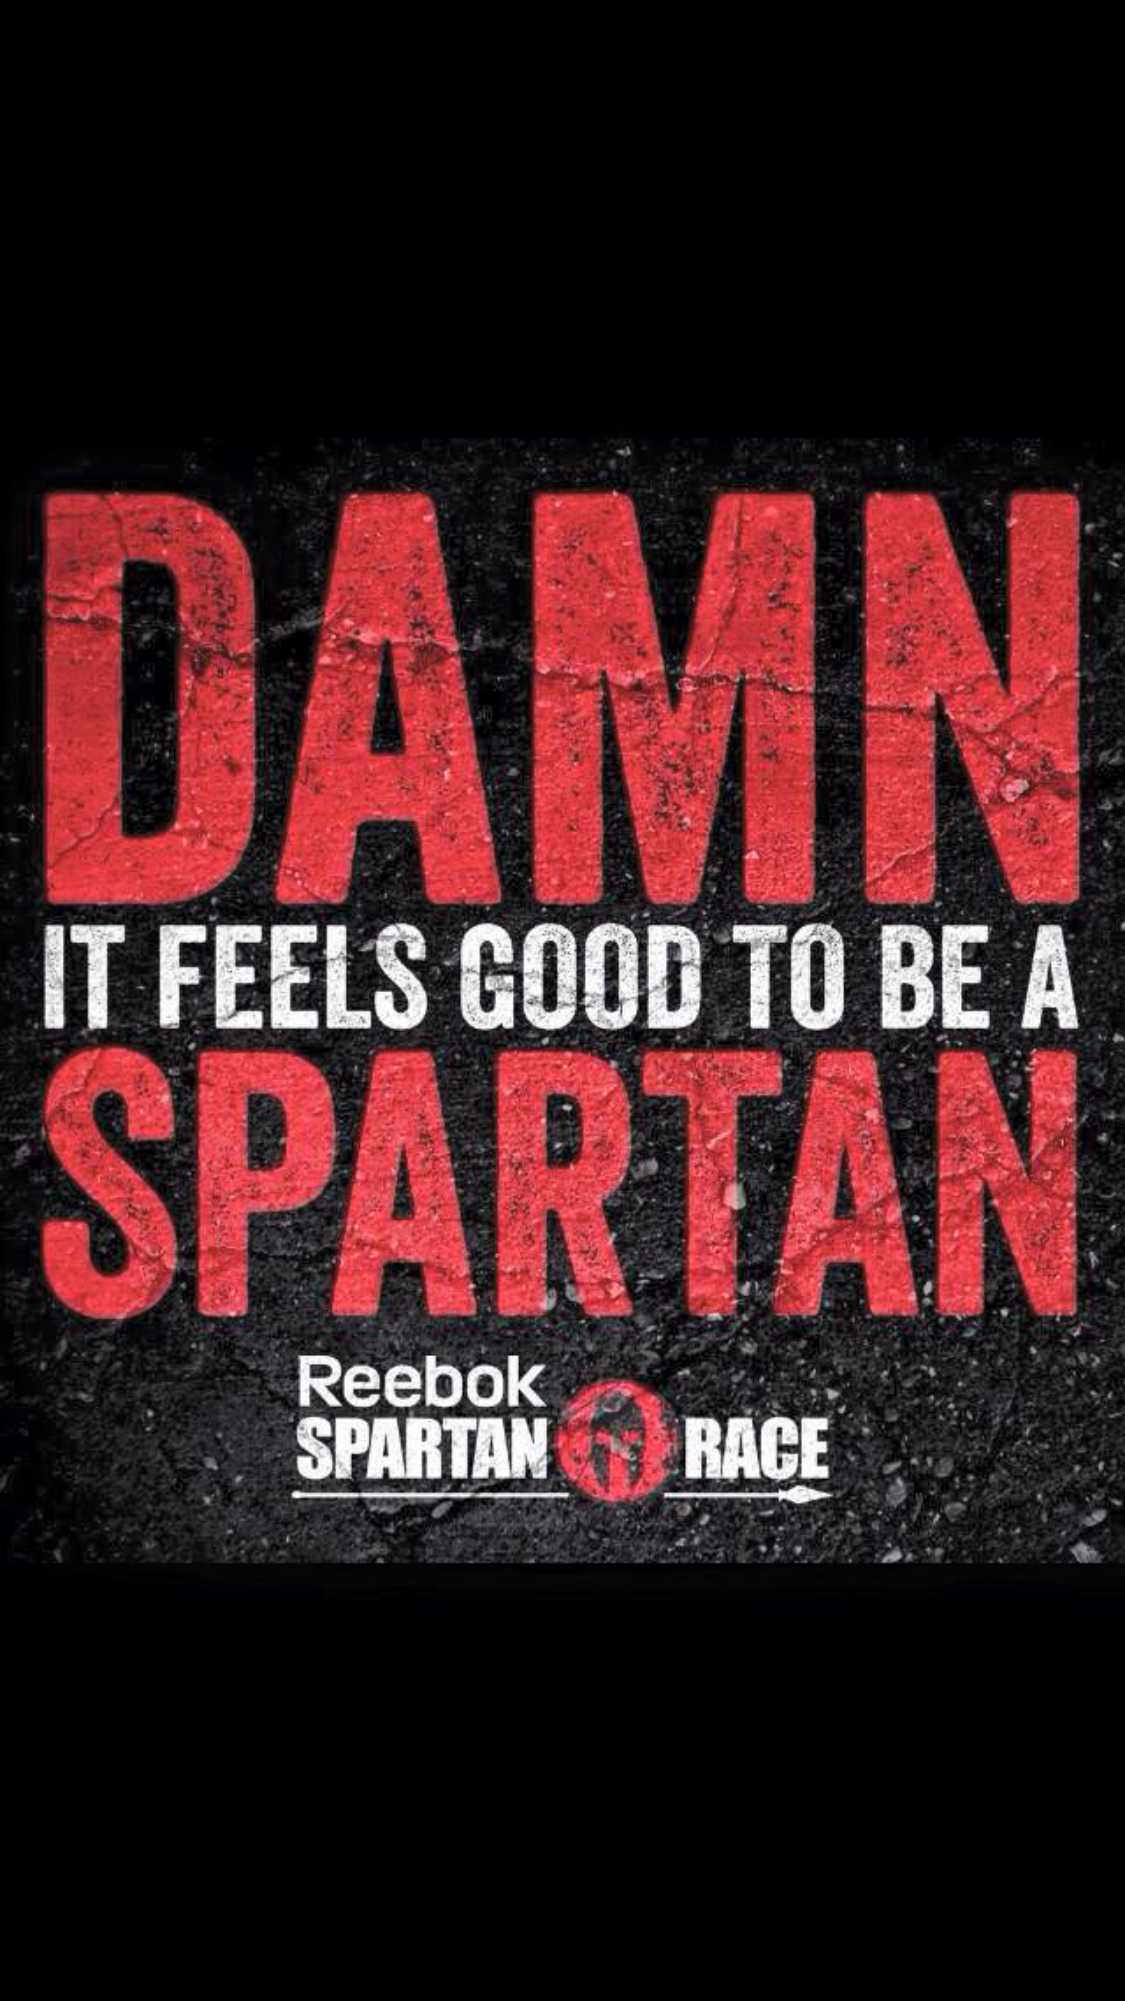 Jerry Hurst On Spartan Races Brotherhood Quotes